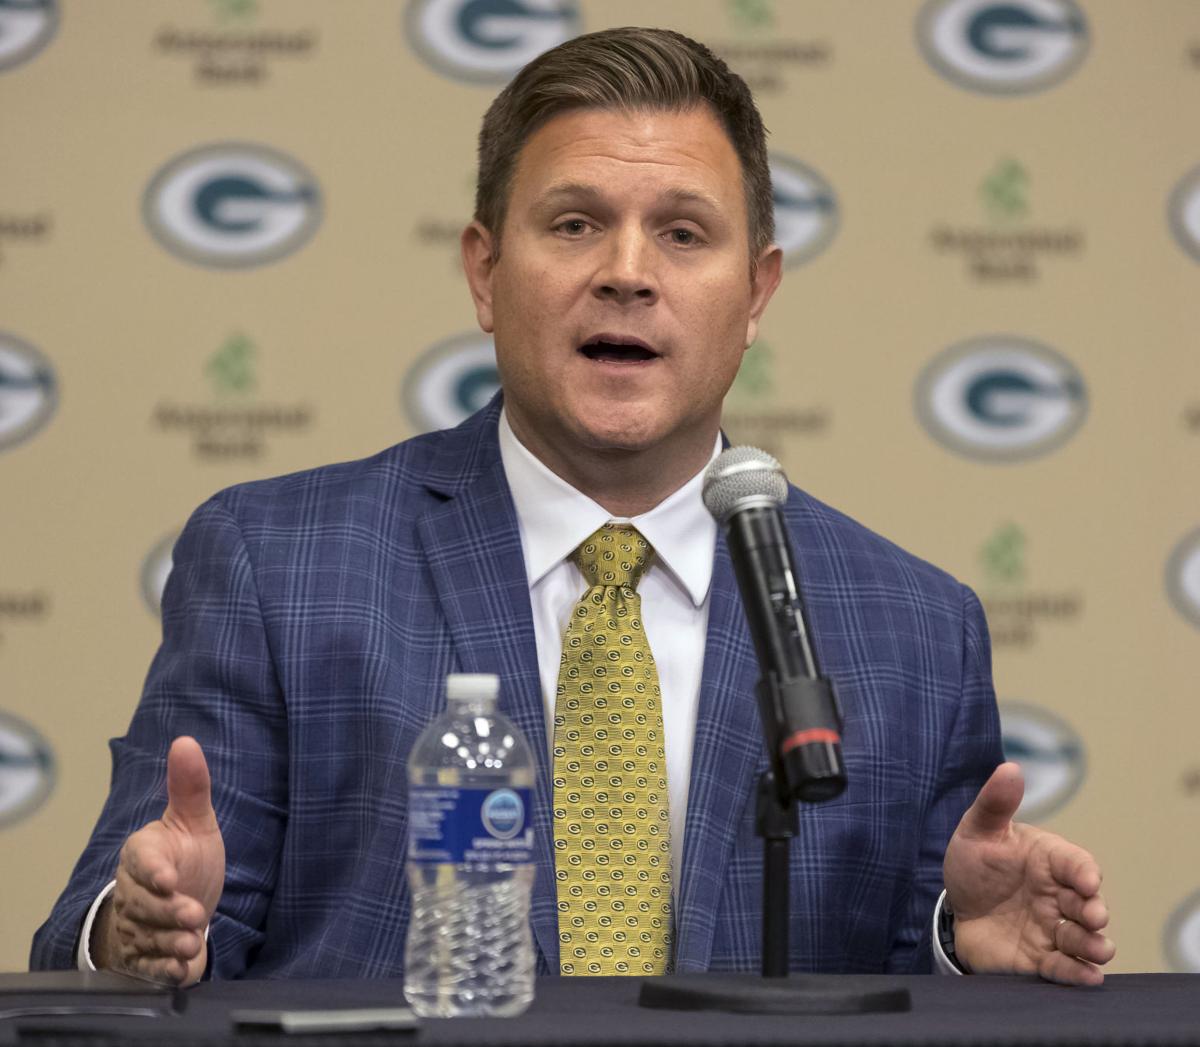 Packers: After landing 'dream job' as GM, Brian Gutekunst indicates he'll be 'more aggressive' in free agent pursuit | Pro football | madison.com